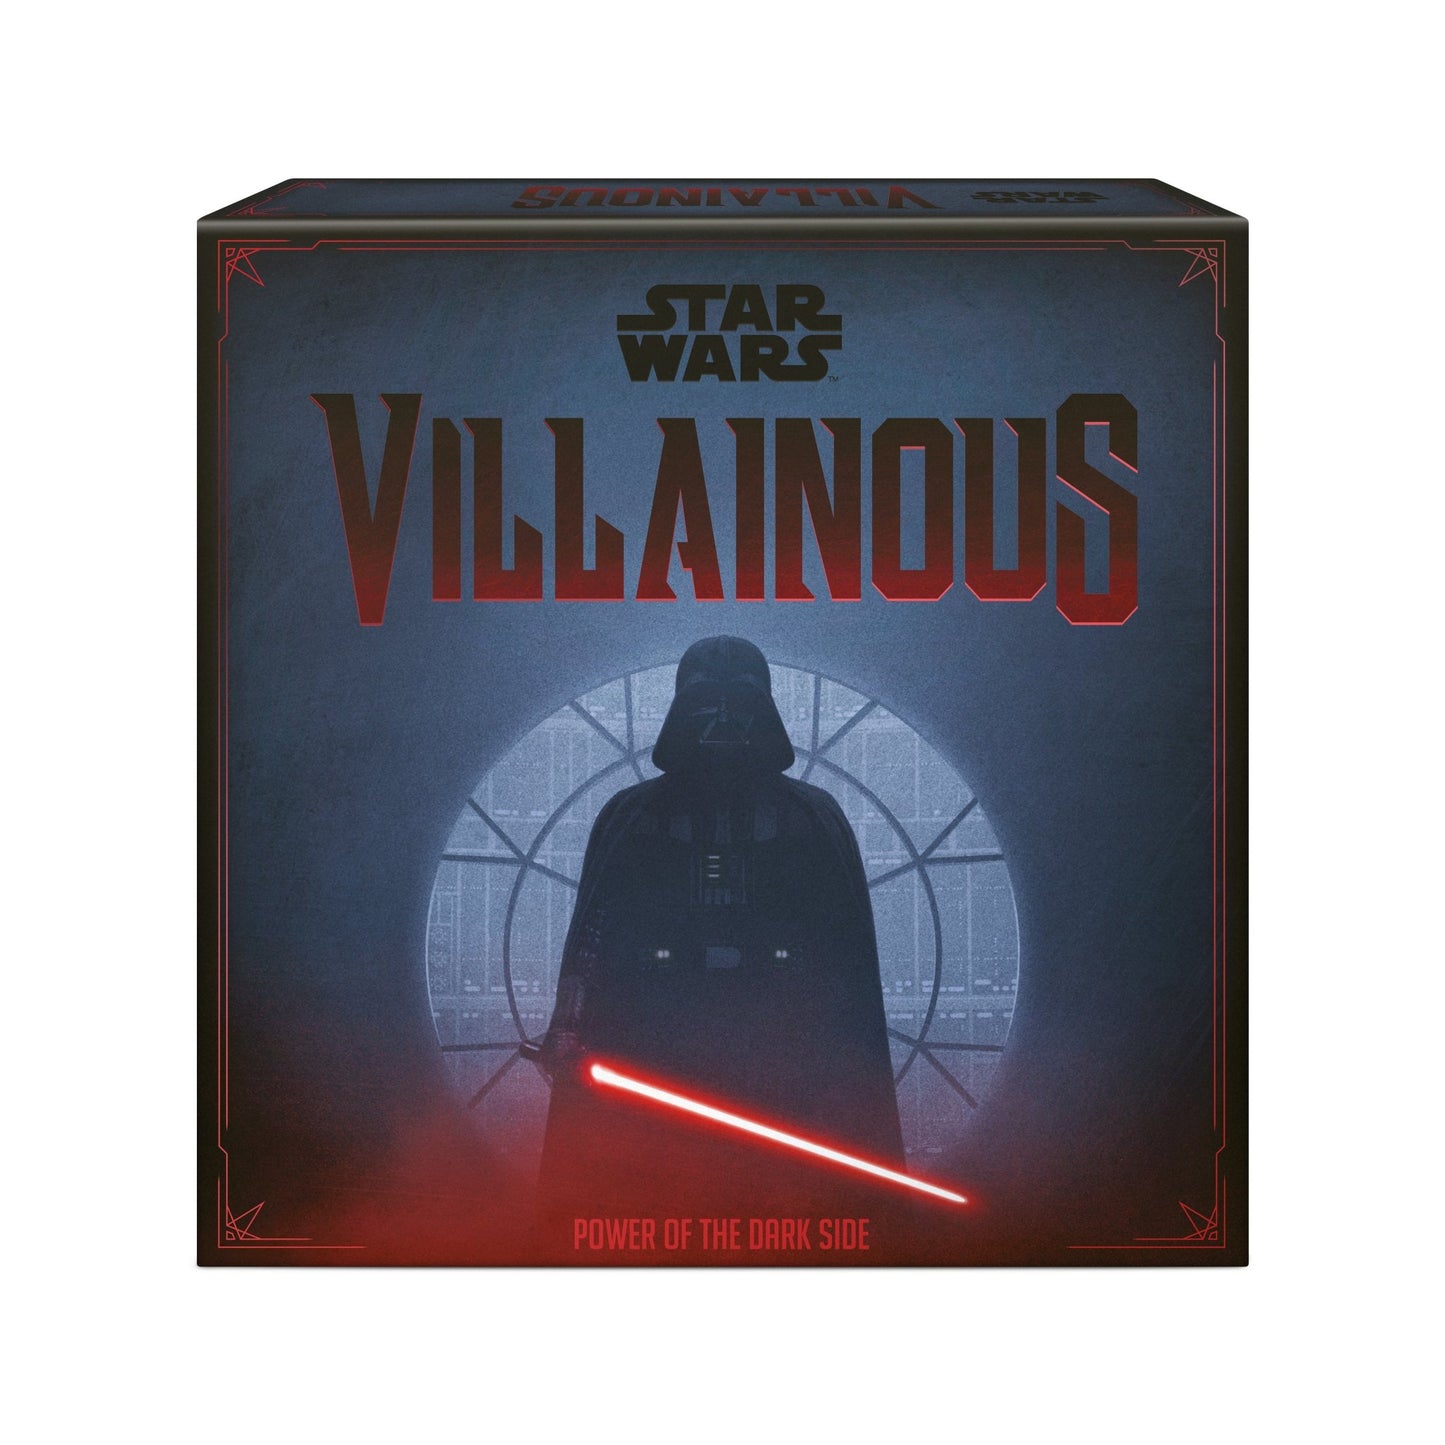 Star Wars Villainous: Power of the Dark Side - The Compleat Strategist